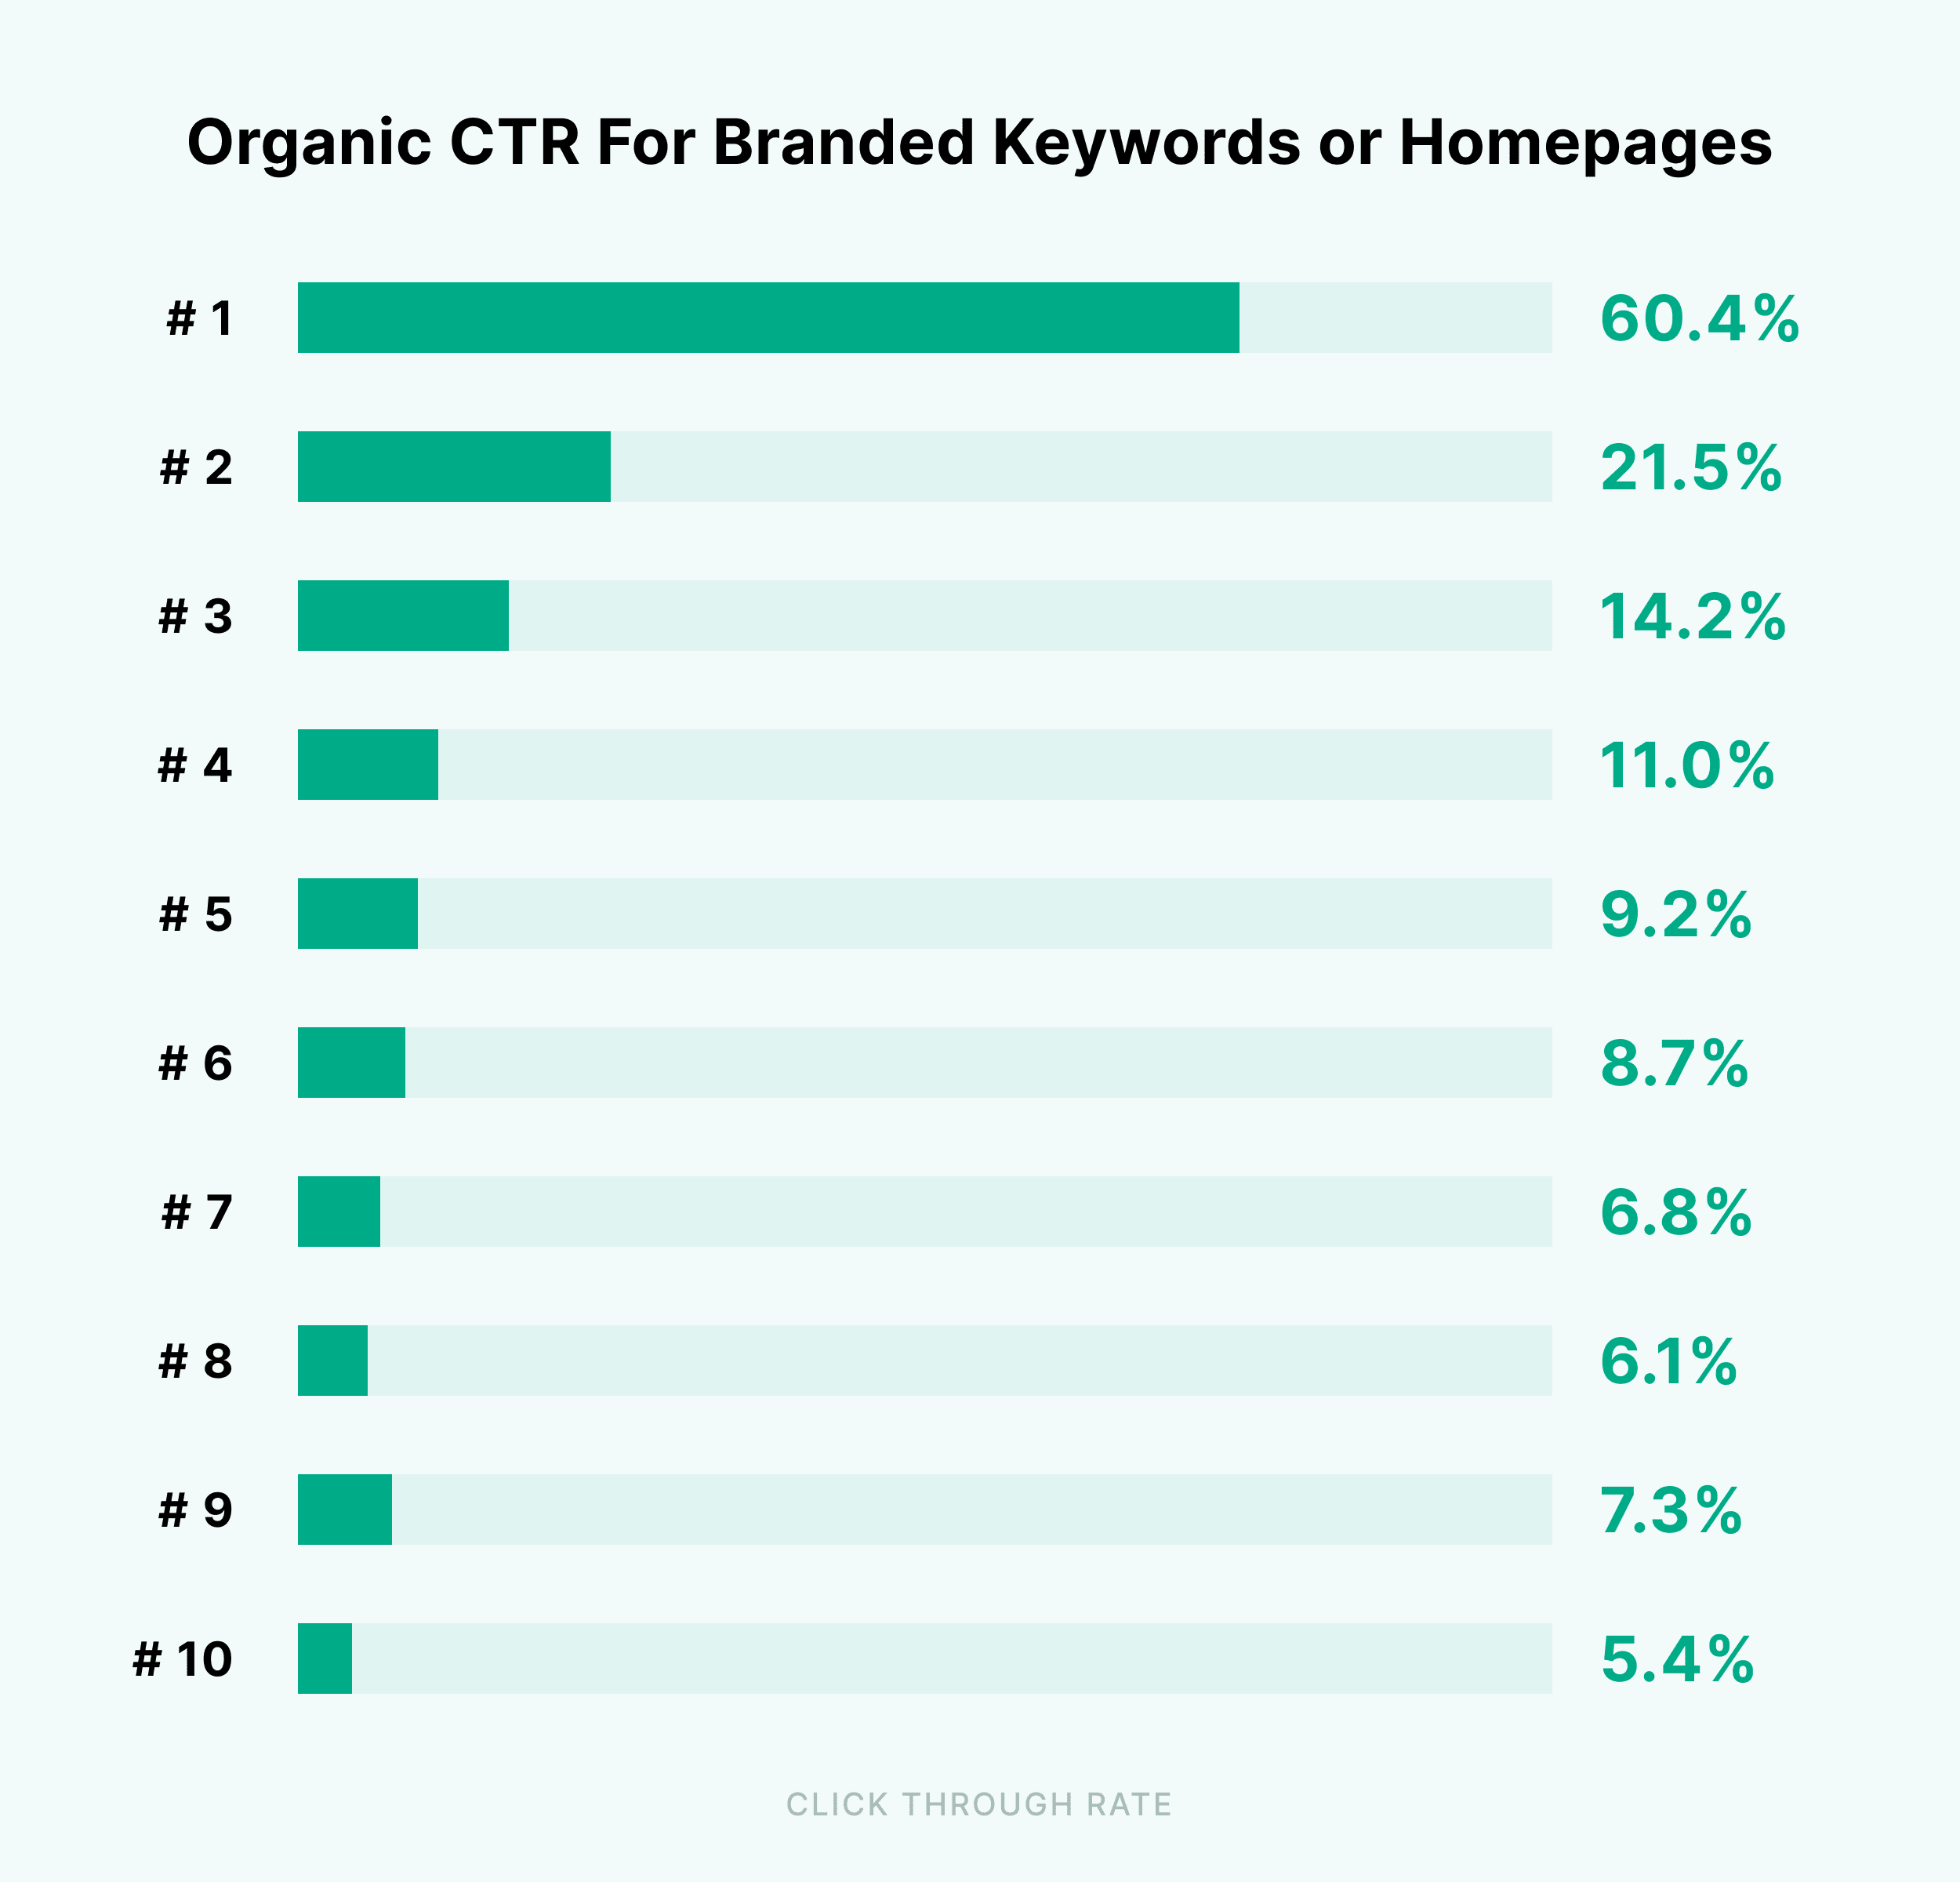 Organic CTR for branded keywords or homepages